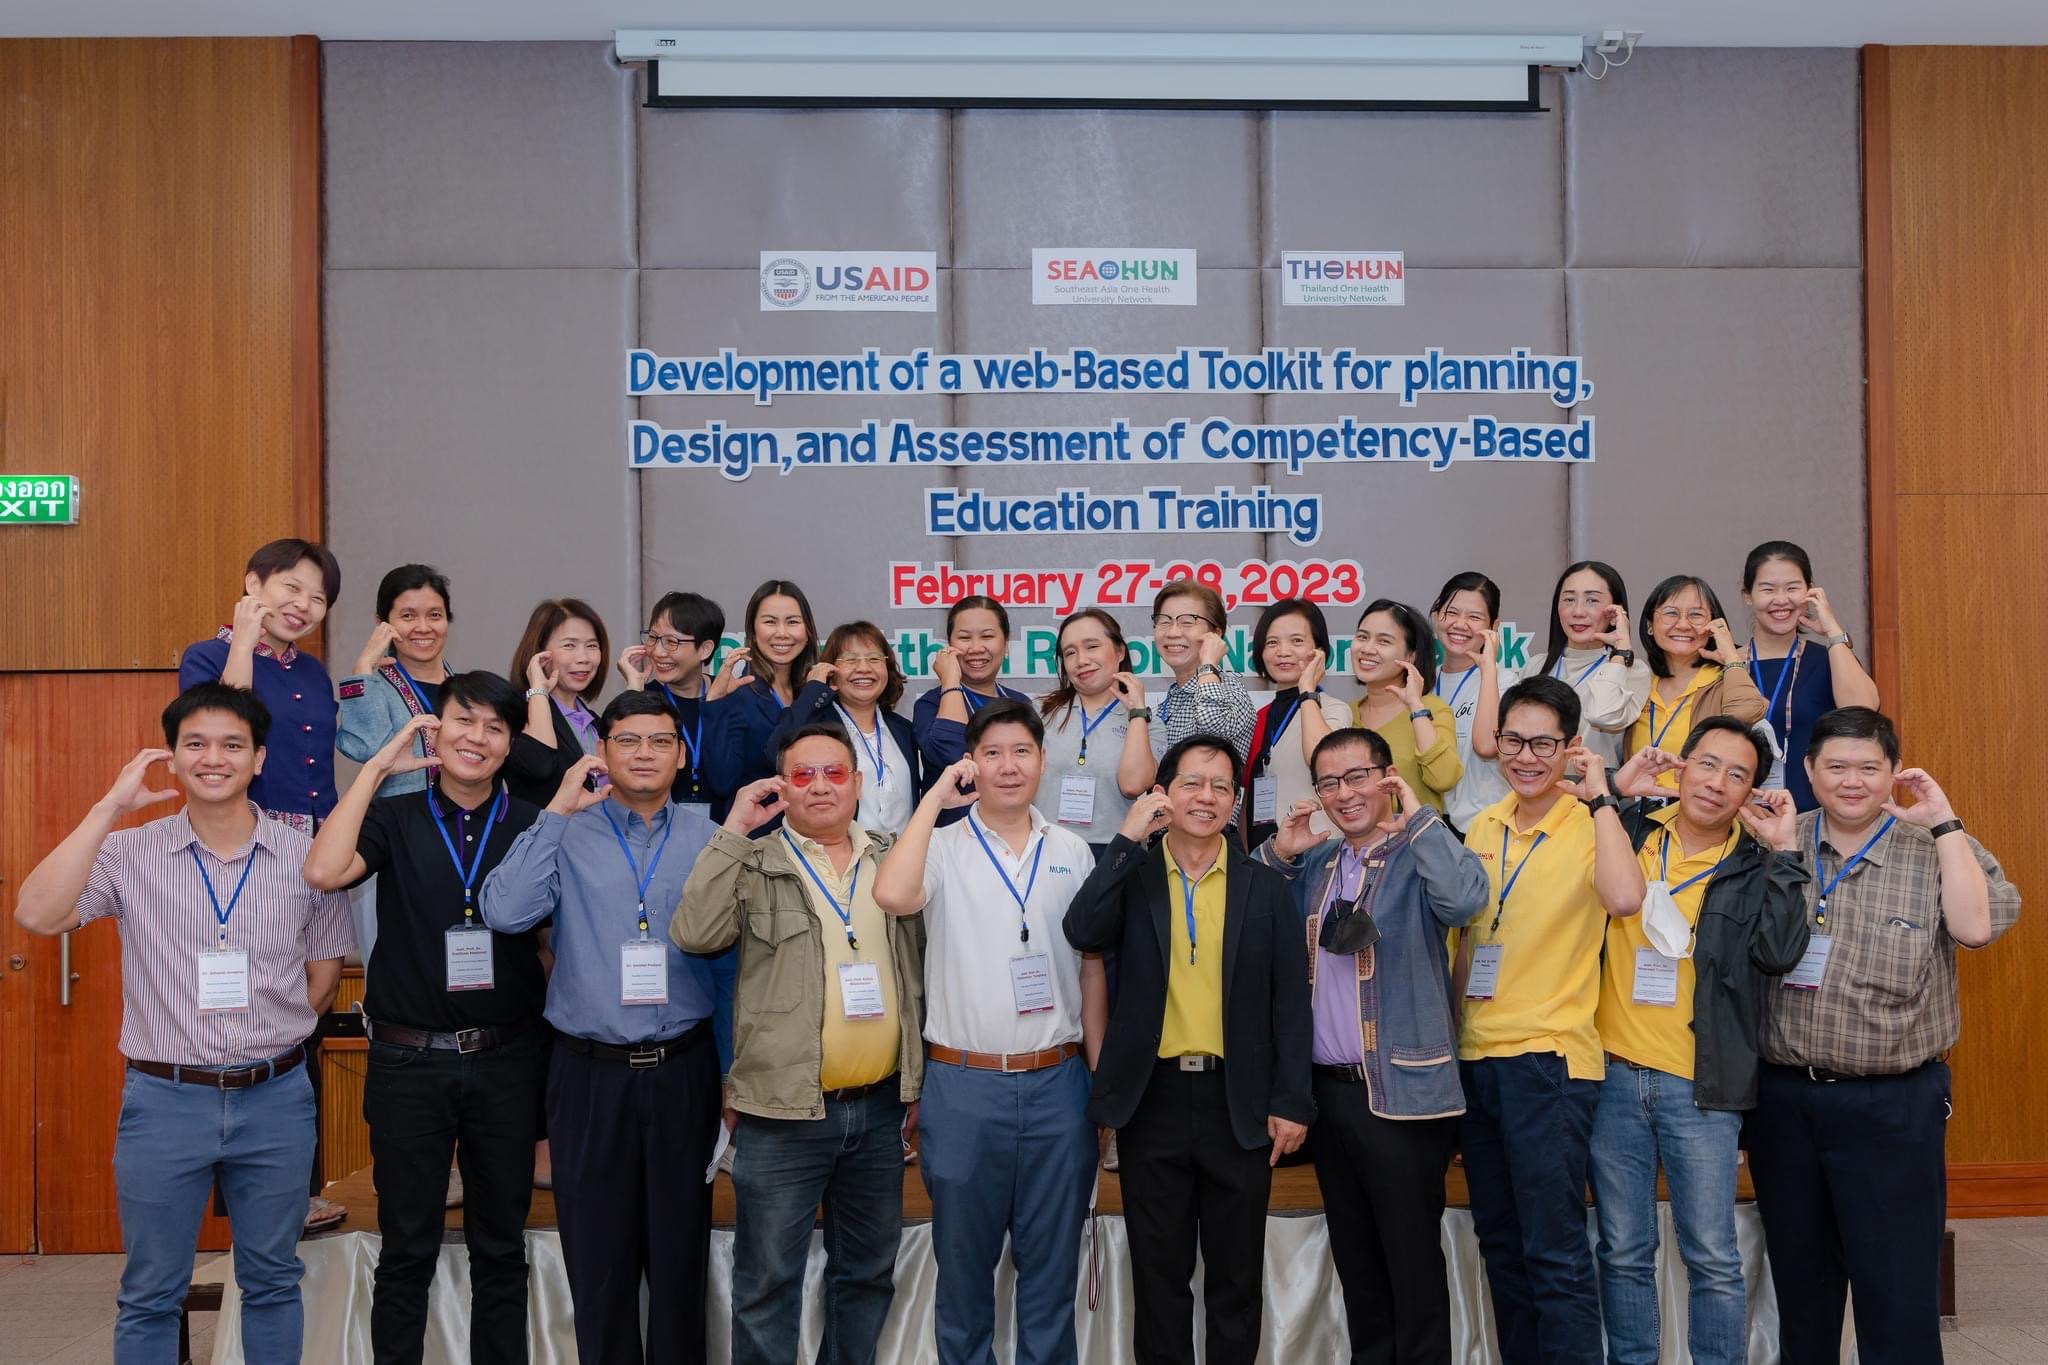 Dr. Saharat Arreeras, a lecturer in the Occupational Health and Safety Program and a representative of the School of Management at Mae Fah Luang University, attended the workshop and gained valuable insights into the most recent advancements in competency